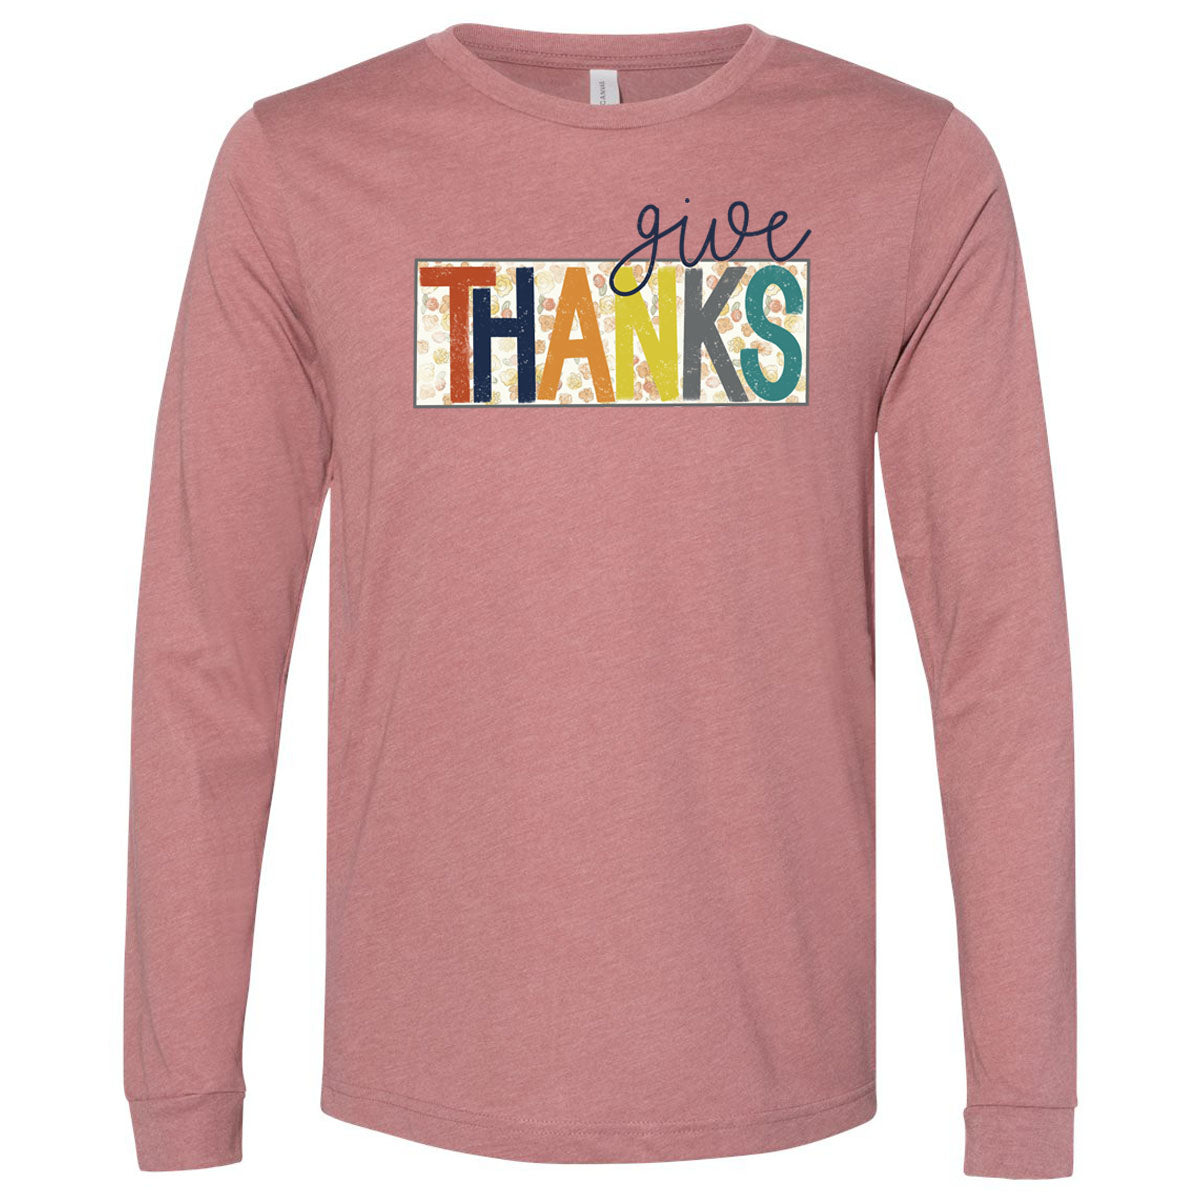 Give Thanks Floral Box - Mauve Tee - Southern Grace Creations